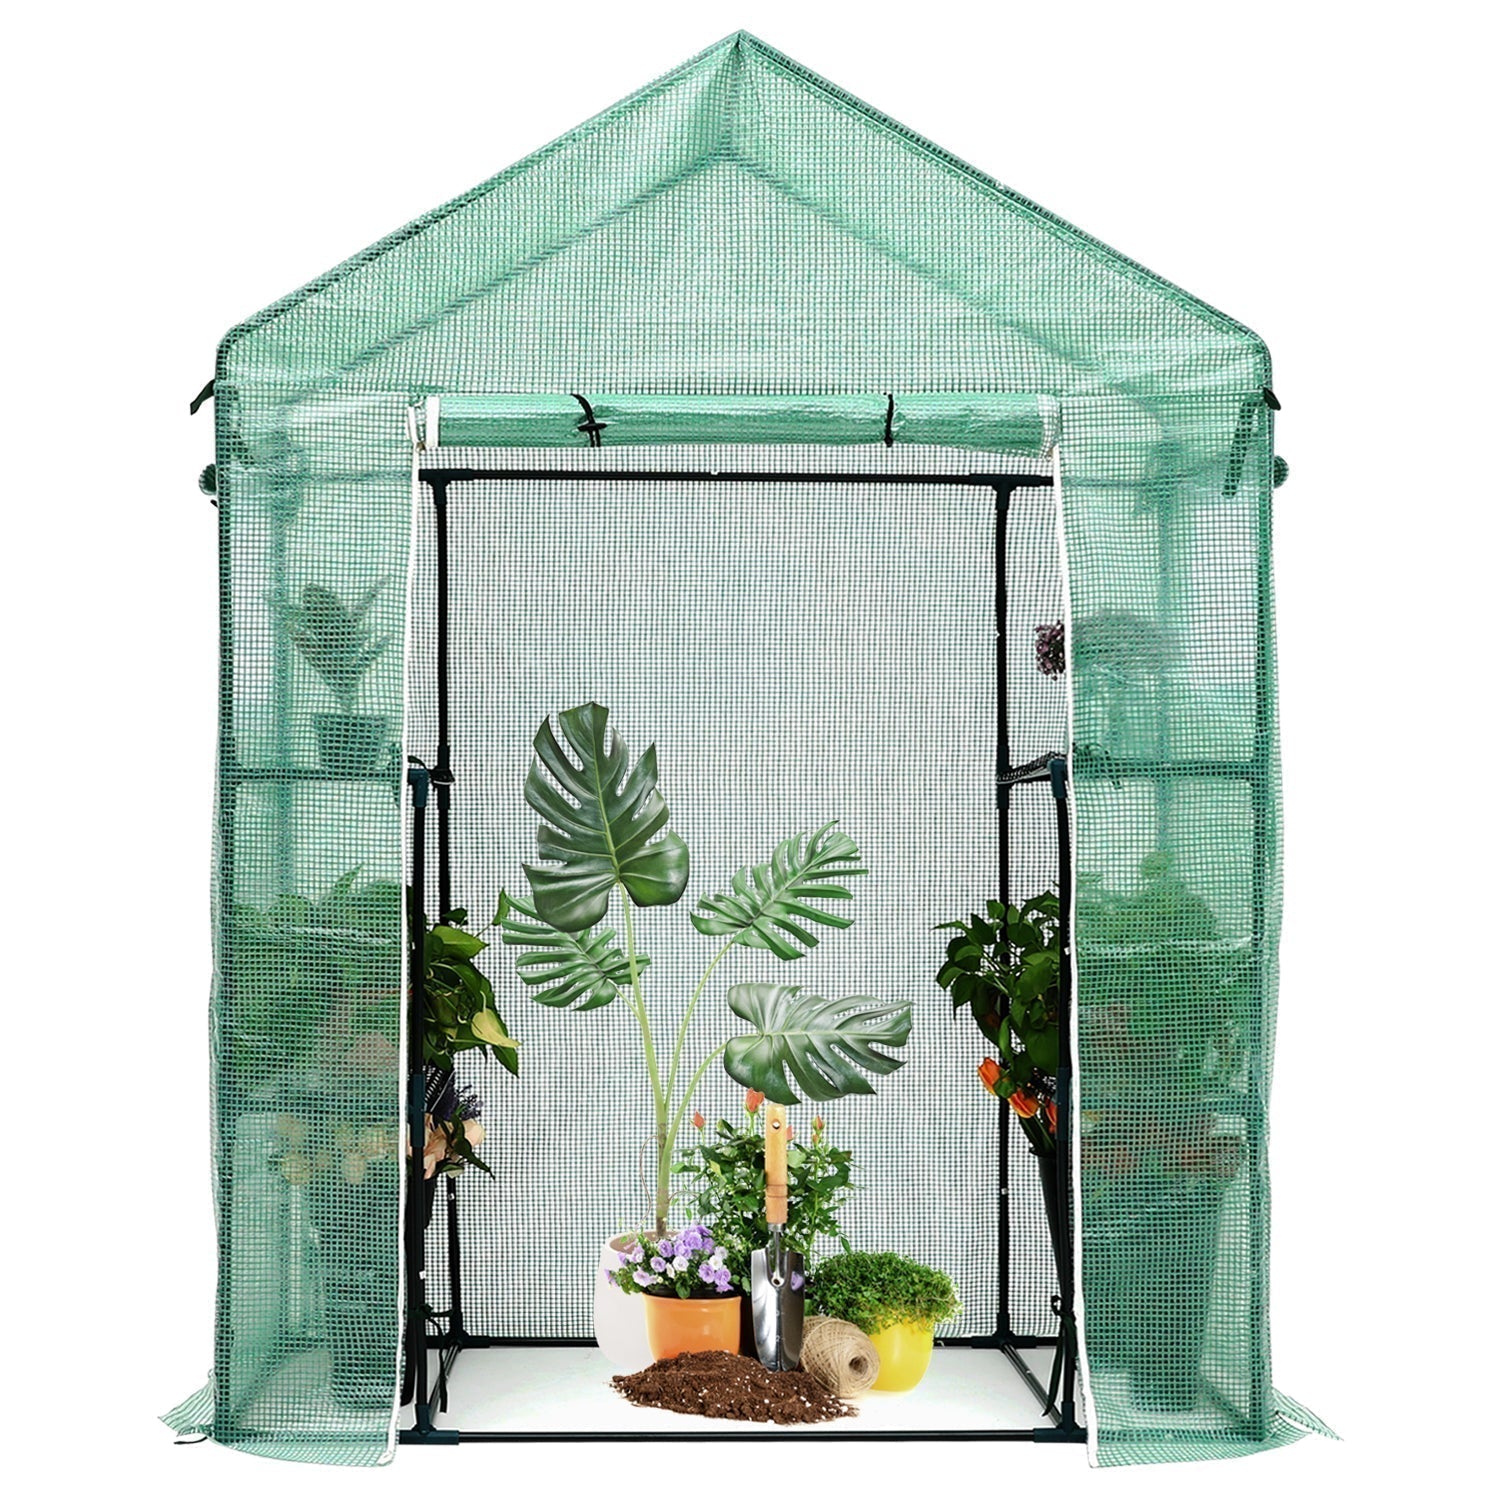 Portable Plant Gardening Greenhouse with 2 Tier 4 Shelves